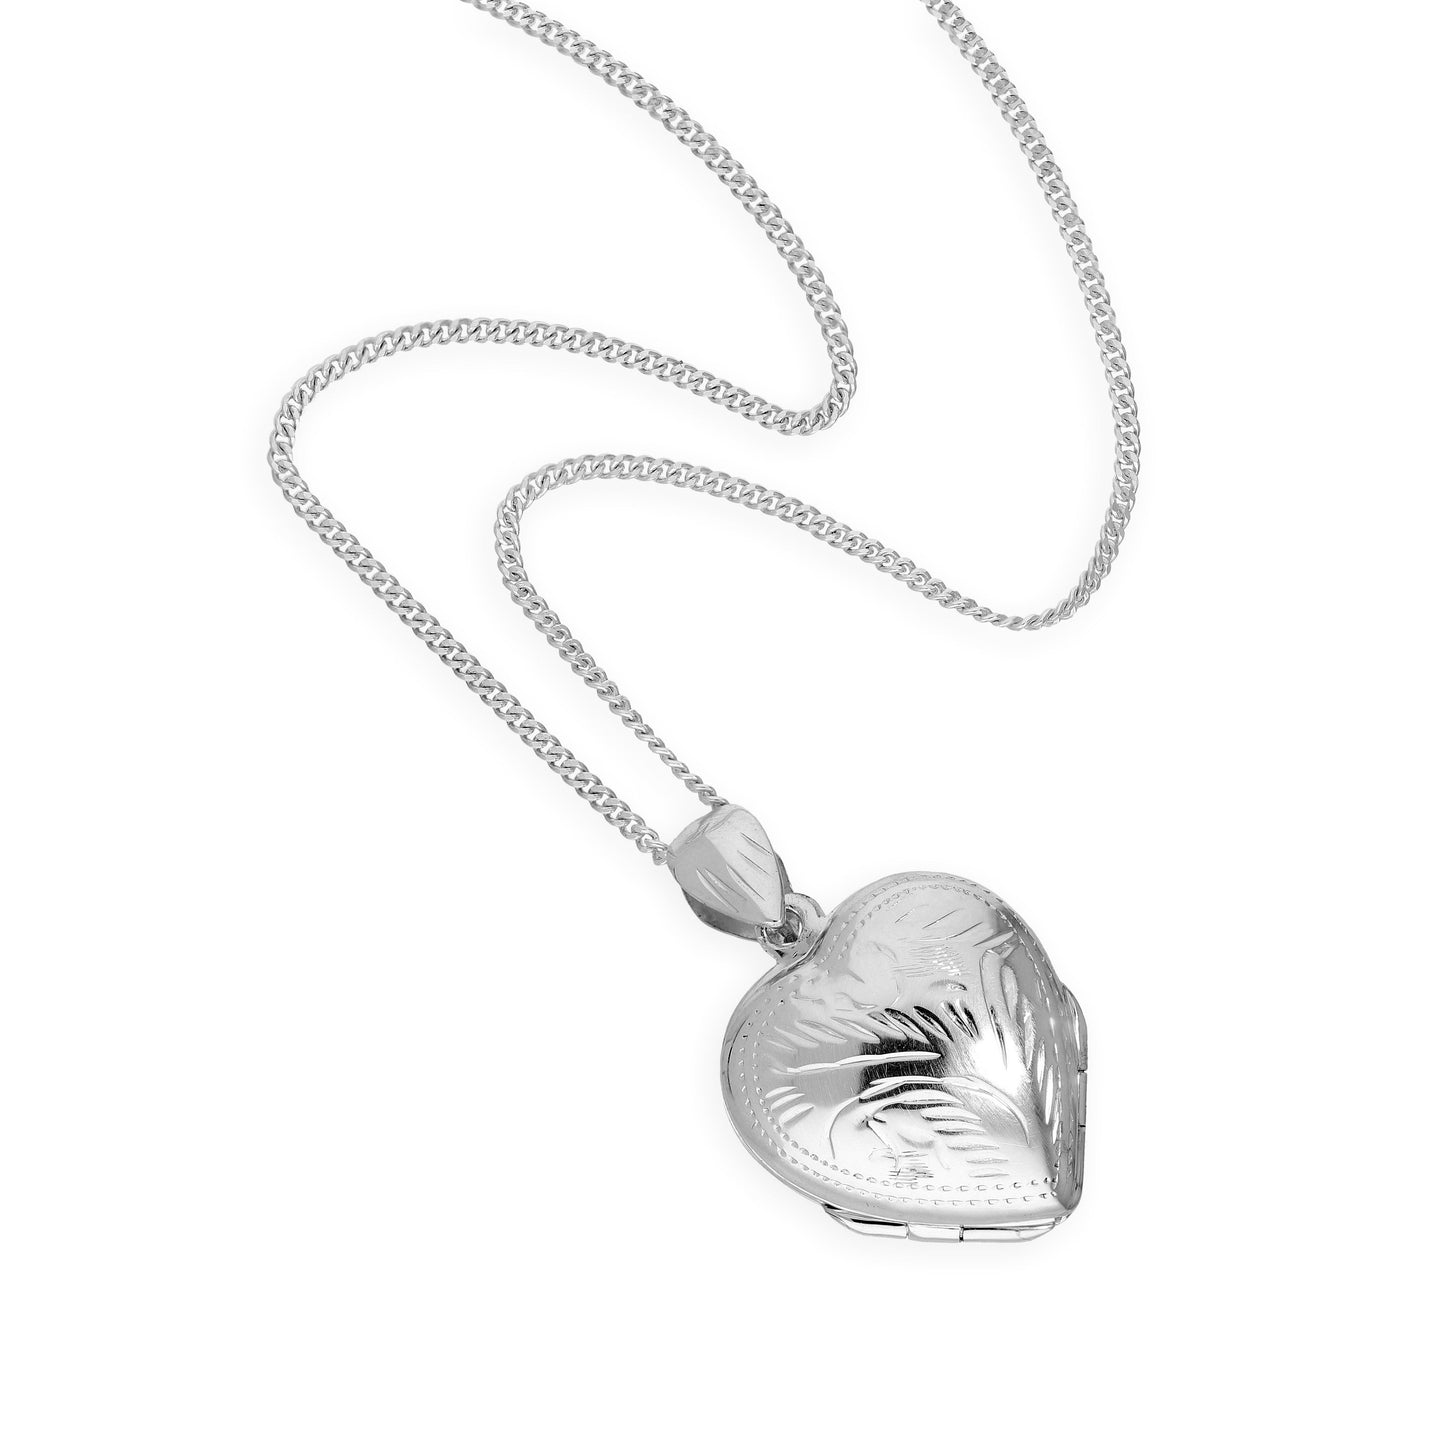 Small Sterling Silver 4 Photo Engraved Heart Family Locket on Chain 16 - 24 Inches